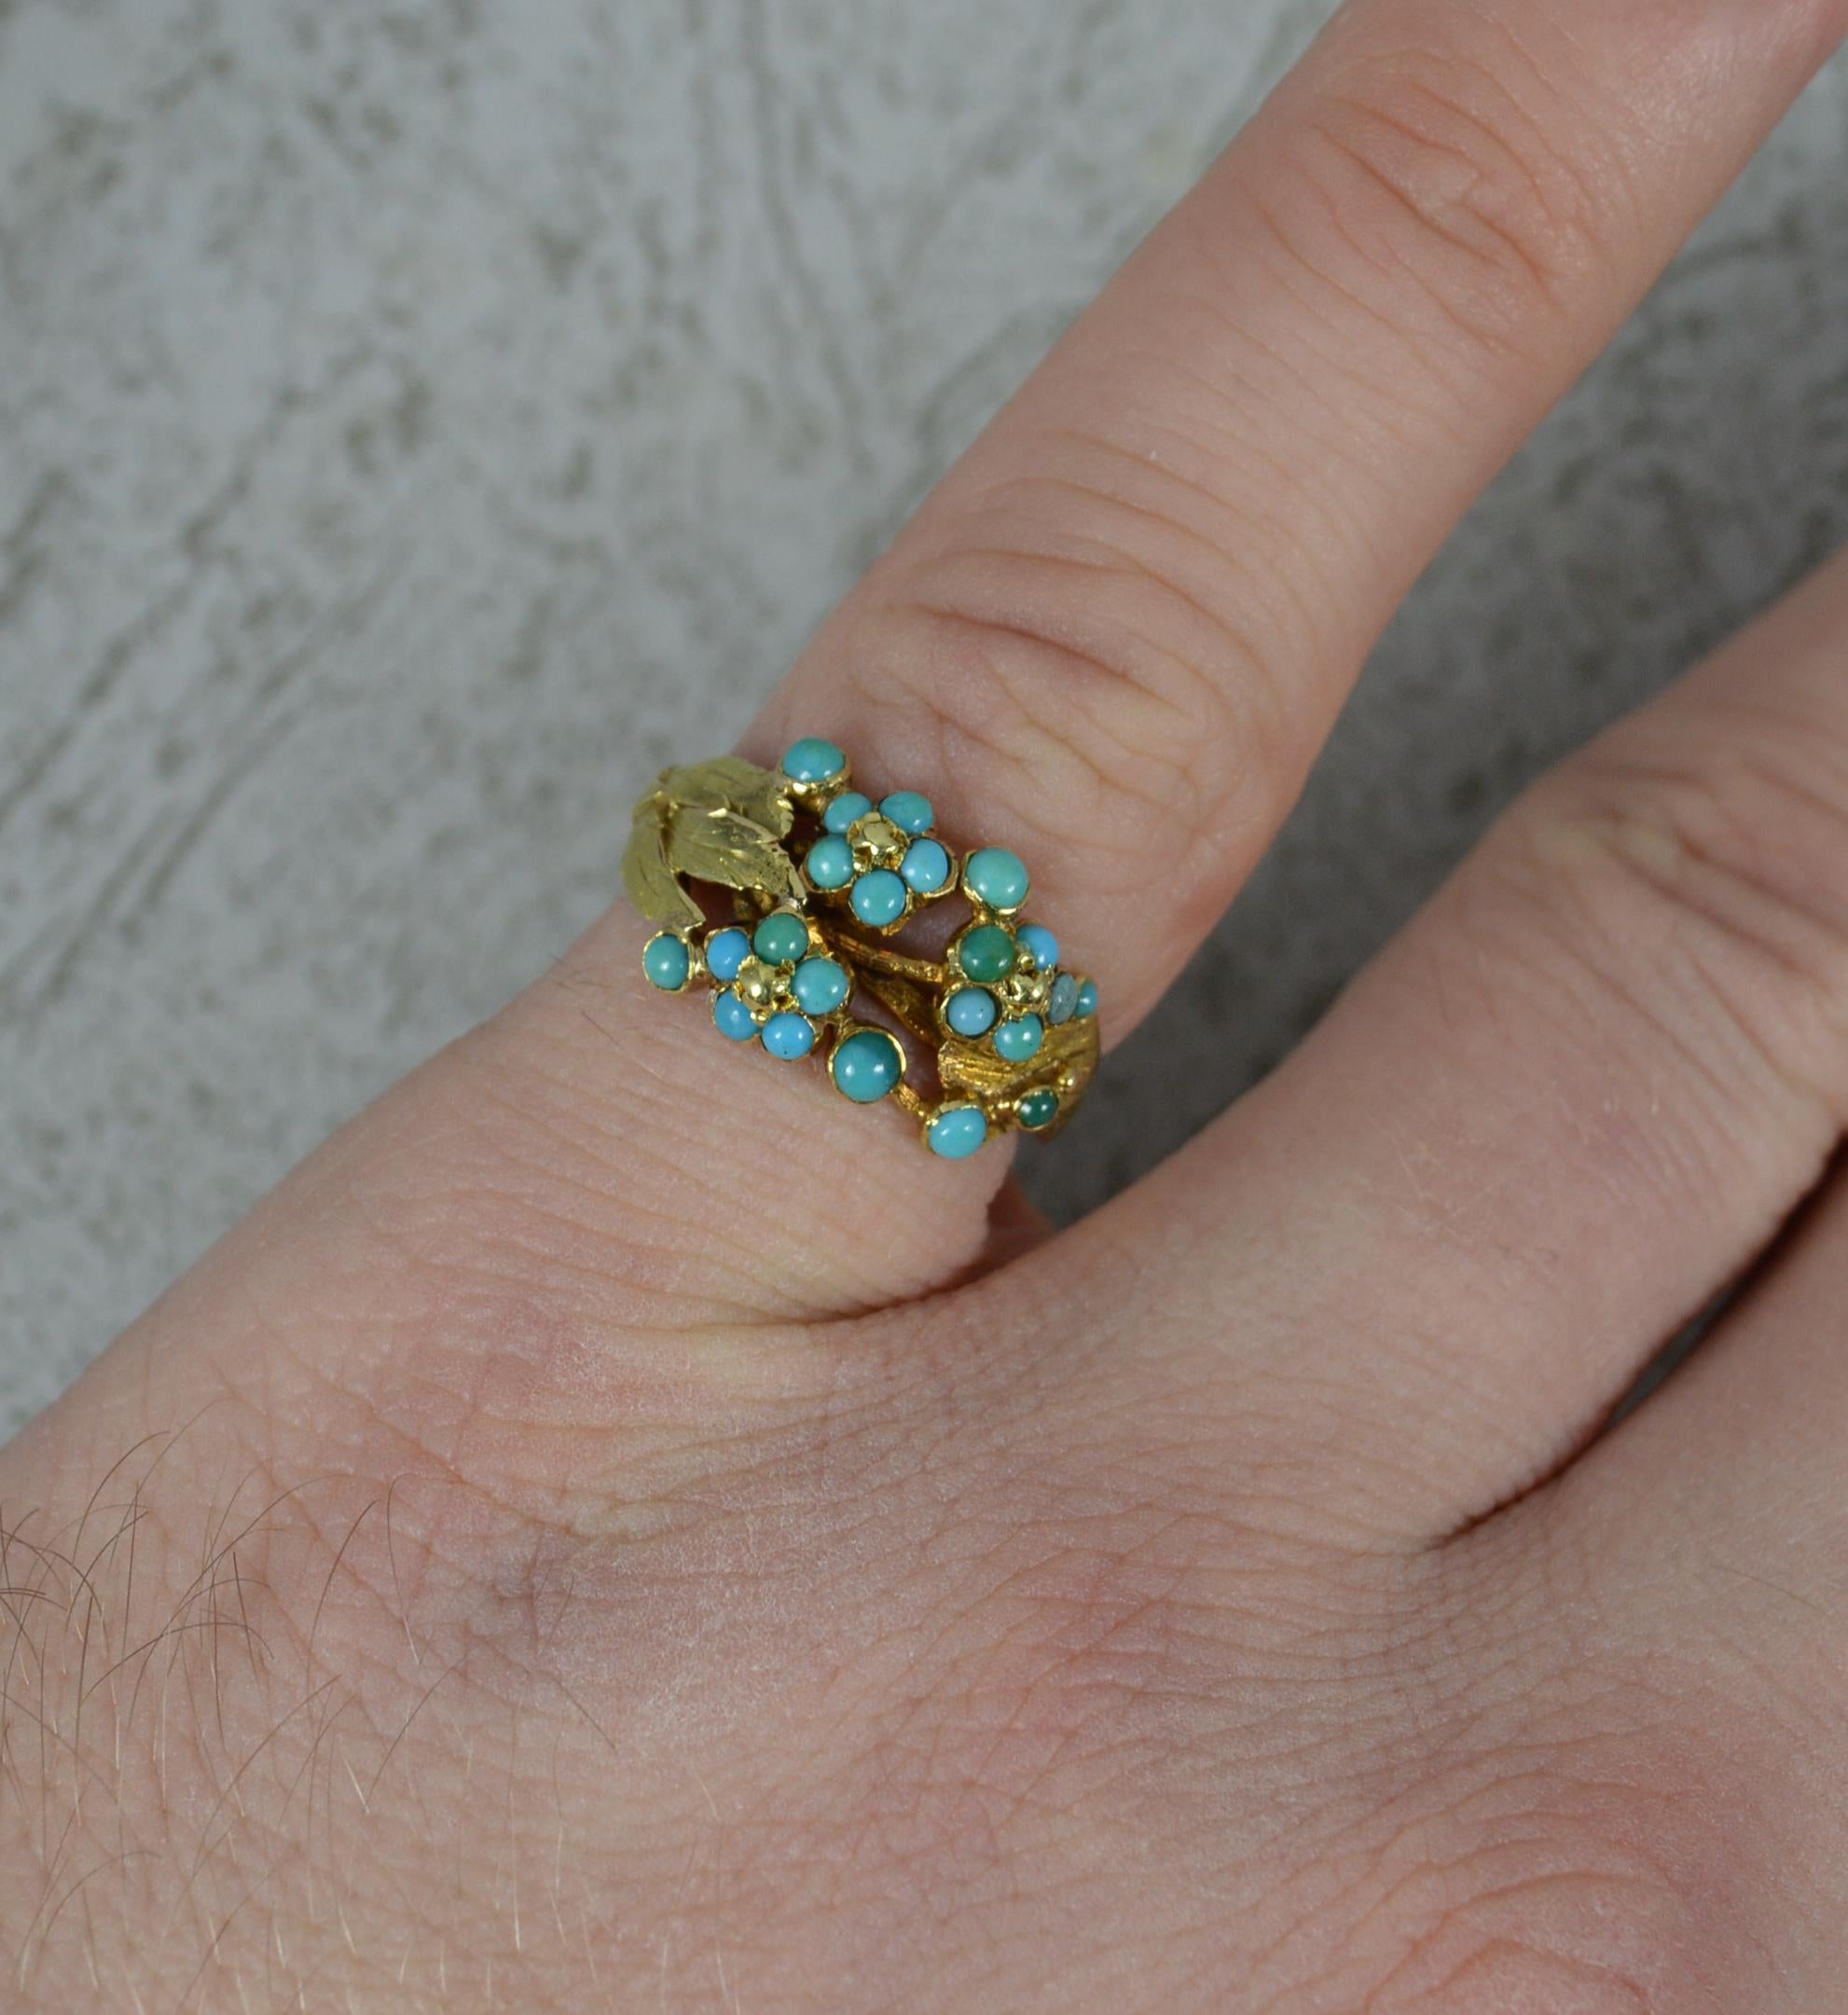 A superb Georgian period ring. Circa 1790.
Solid 15 carat yellow gold example.
Designed with flower head clusters set with small round turquoise cabochons with a band that comprises of leaves and a floral finish.
15mm x 11mm cluster head.